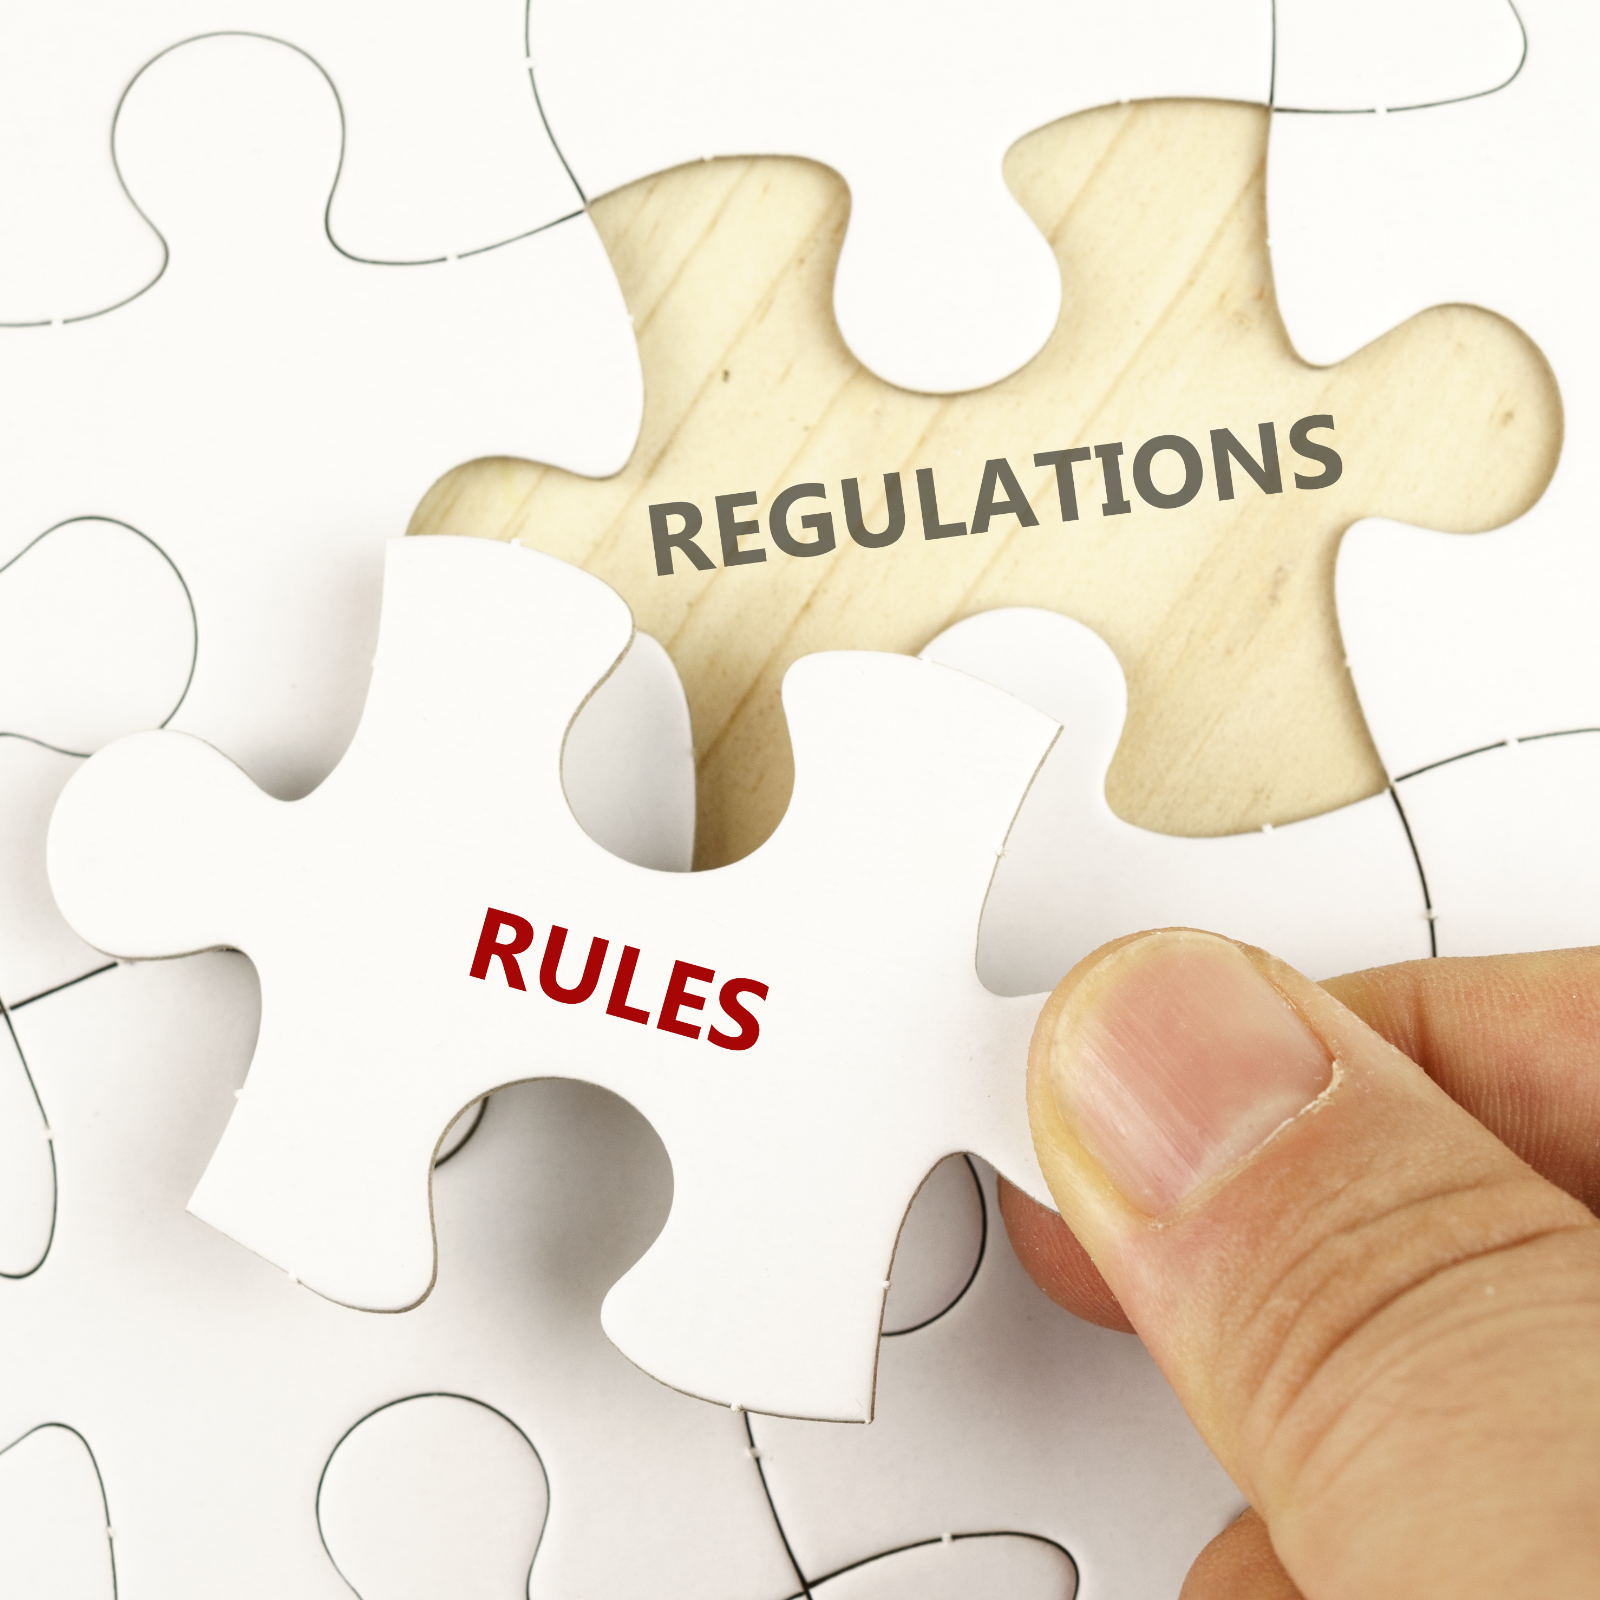 Japanese Regulator Publishes Proposed Rules for Cryptocurrency Service Providers